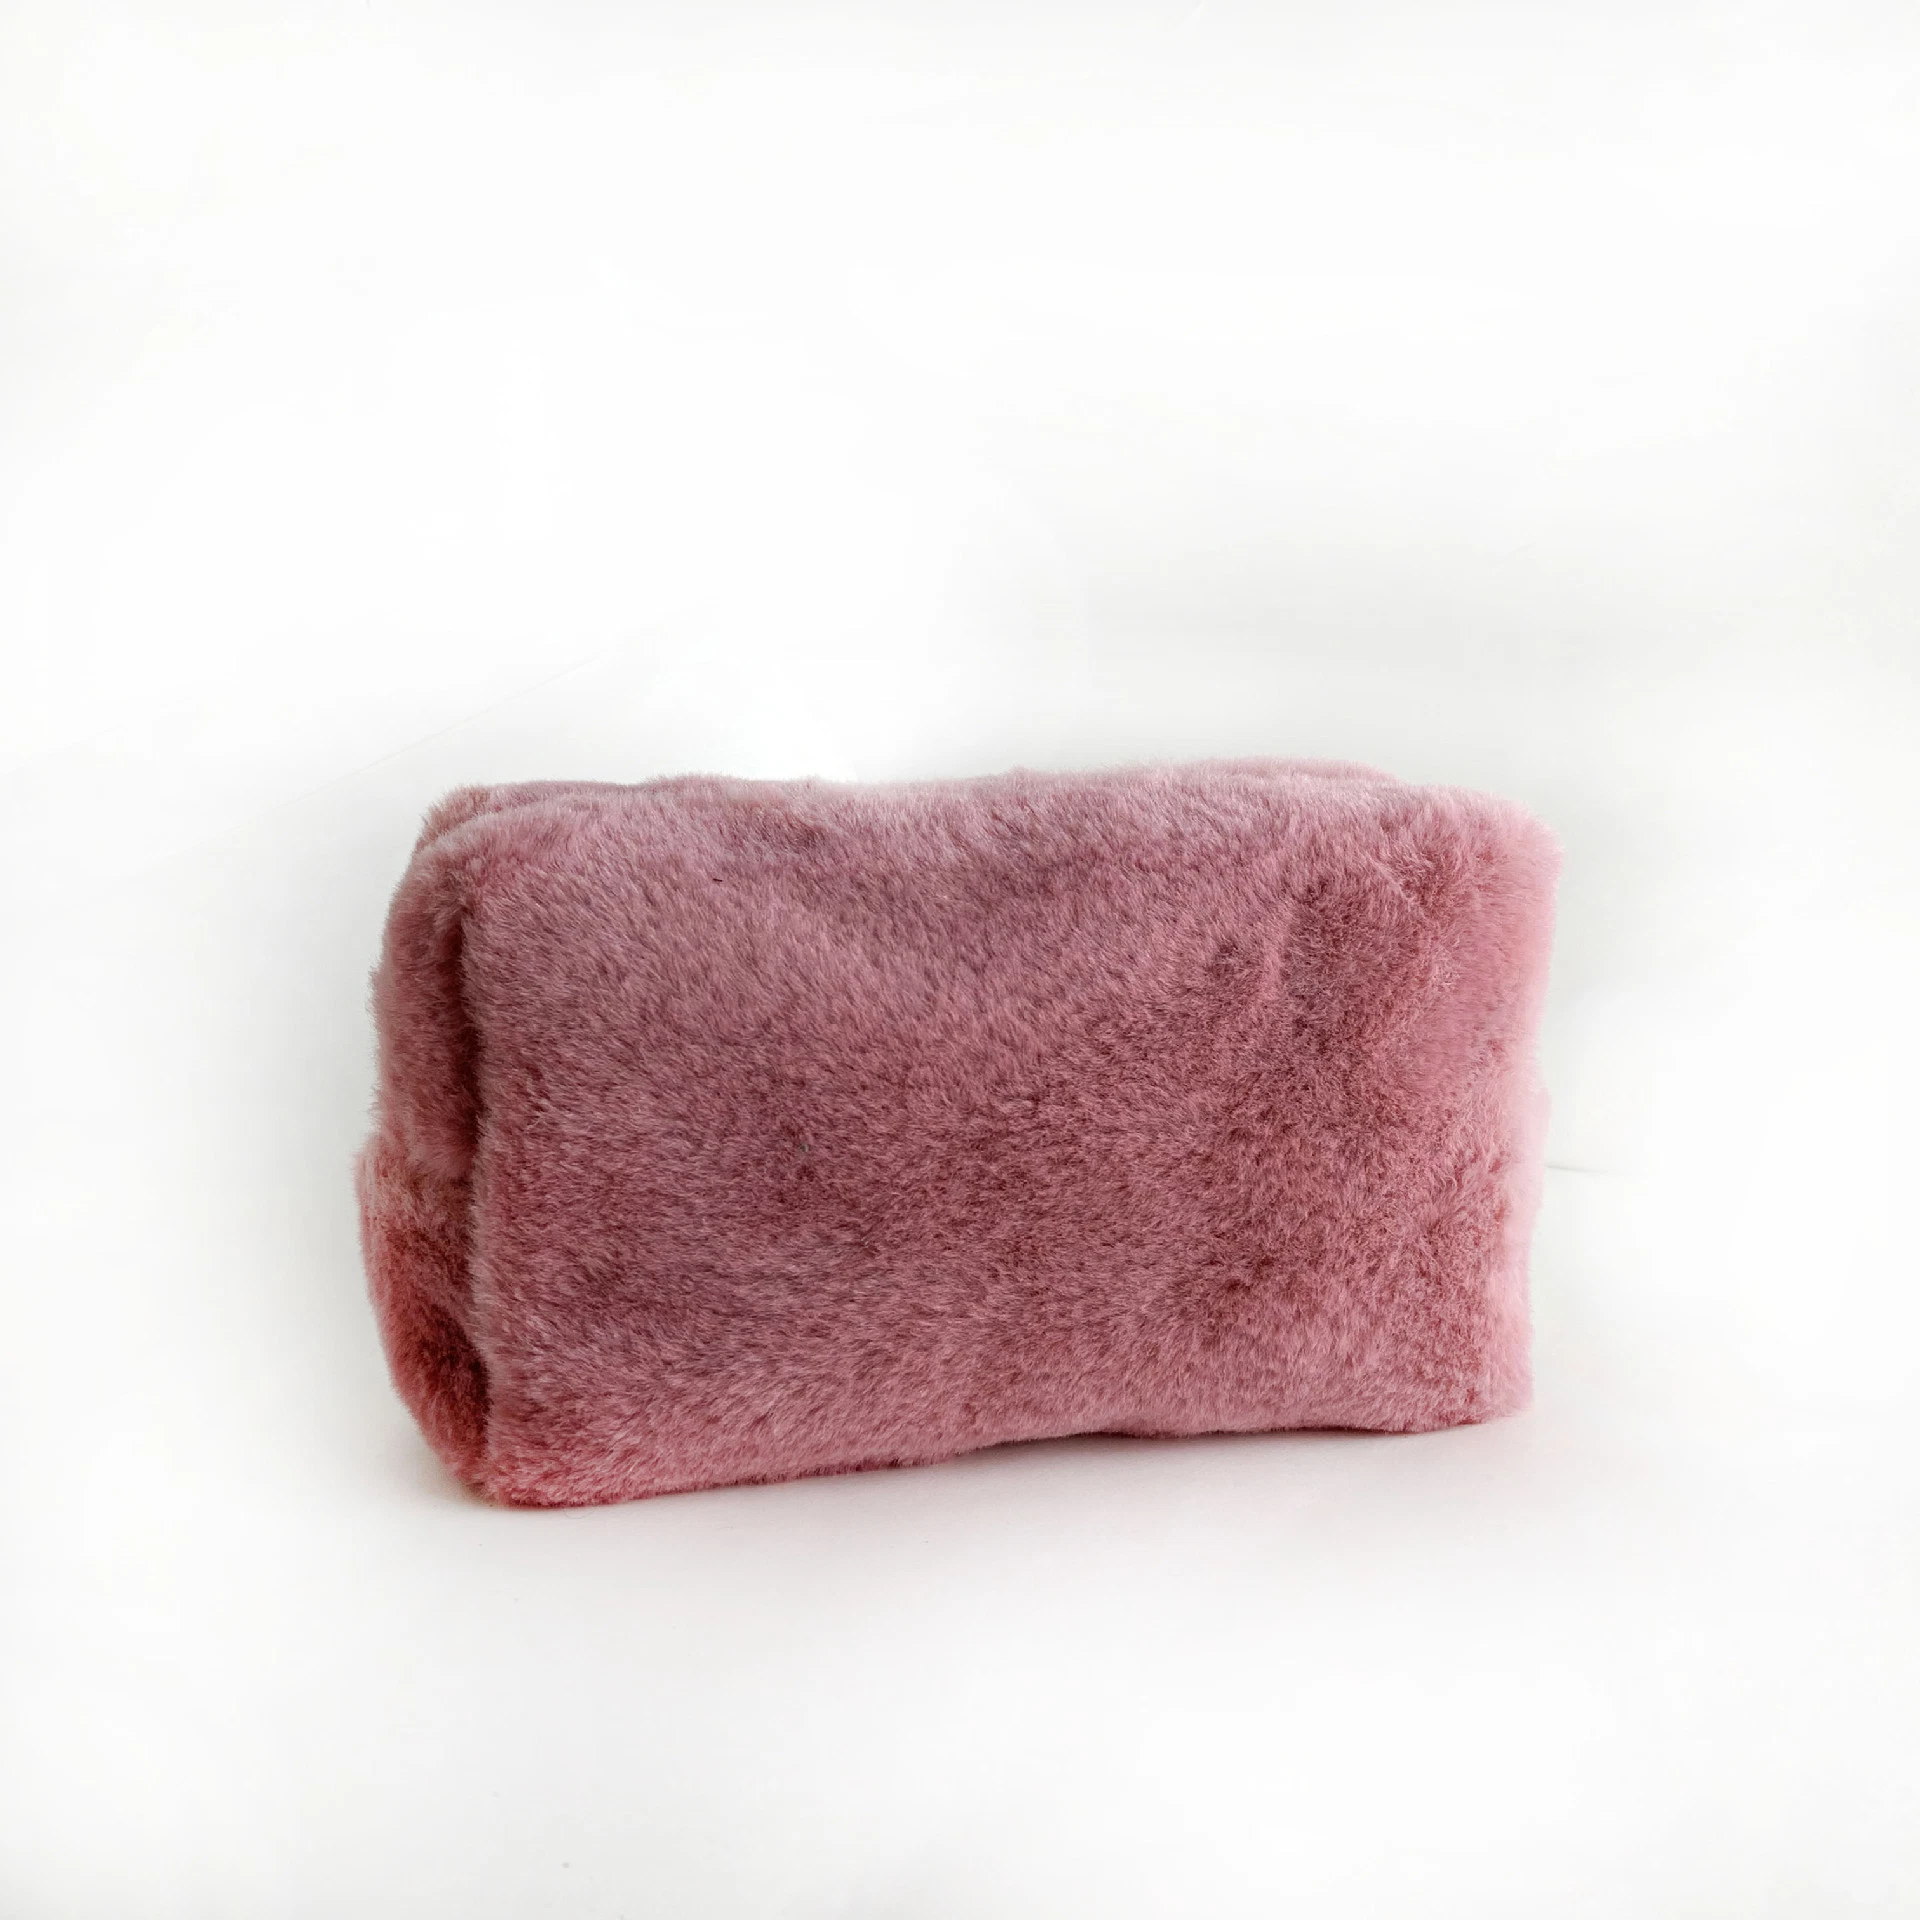 OEM Fax Fur Cosmetic Bag Plush Makeup Pouch Houlder Stationery Storage Bag for Travel and Toiletry